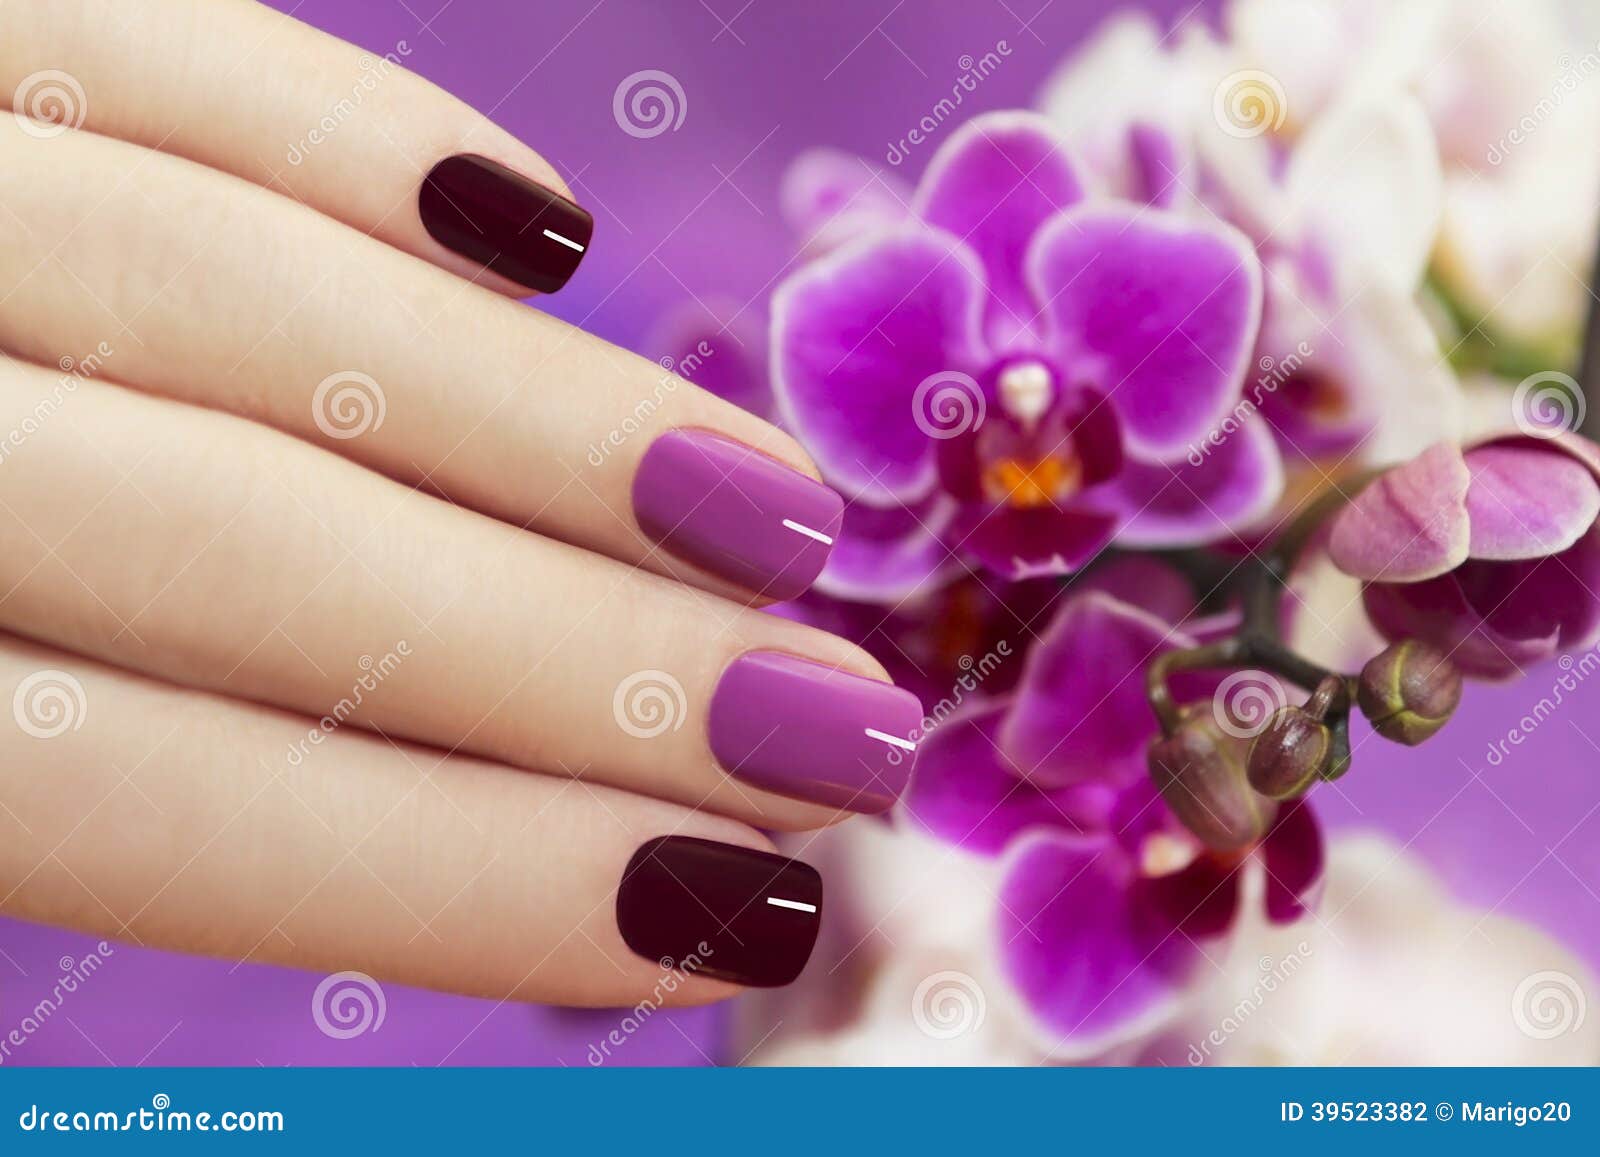 Two-Tone Gel Nail Designs with Floral Accents - wide 4